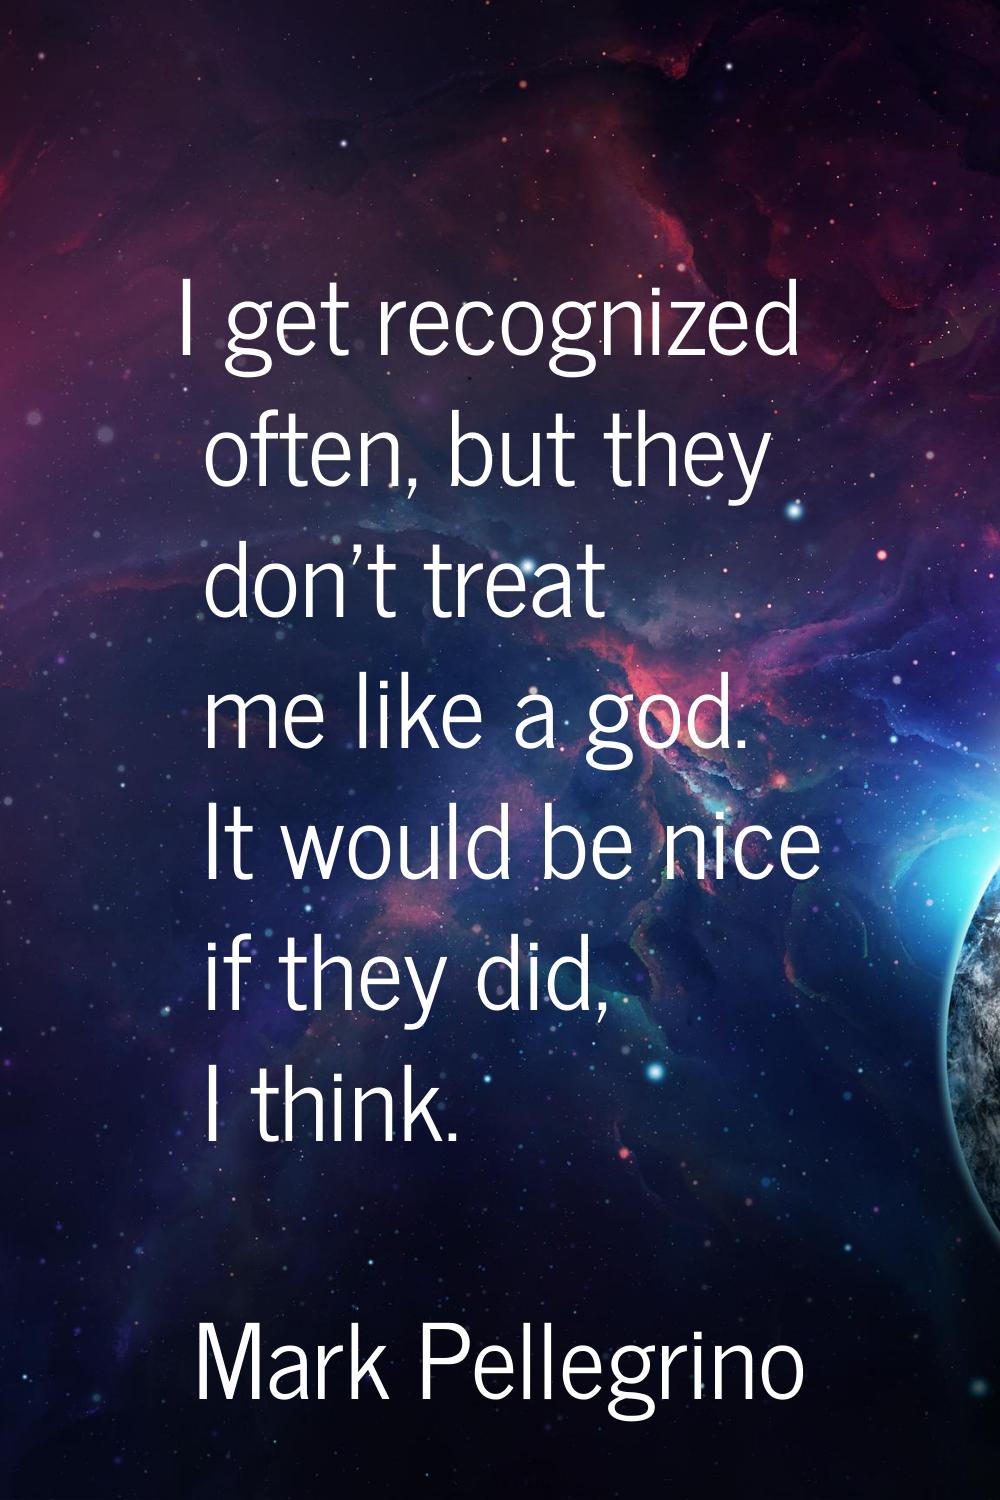 I get recognized often, but they don't treat me like a god. It would be nice if they did, I think.